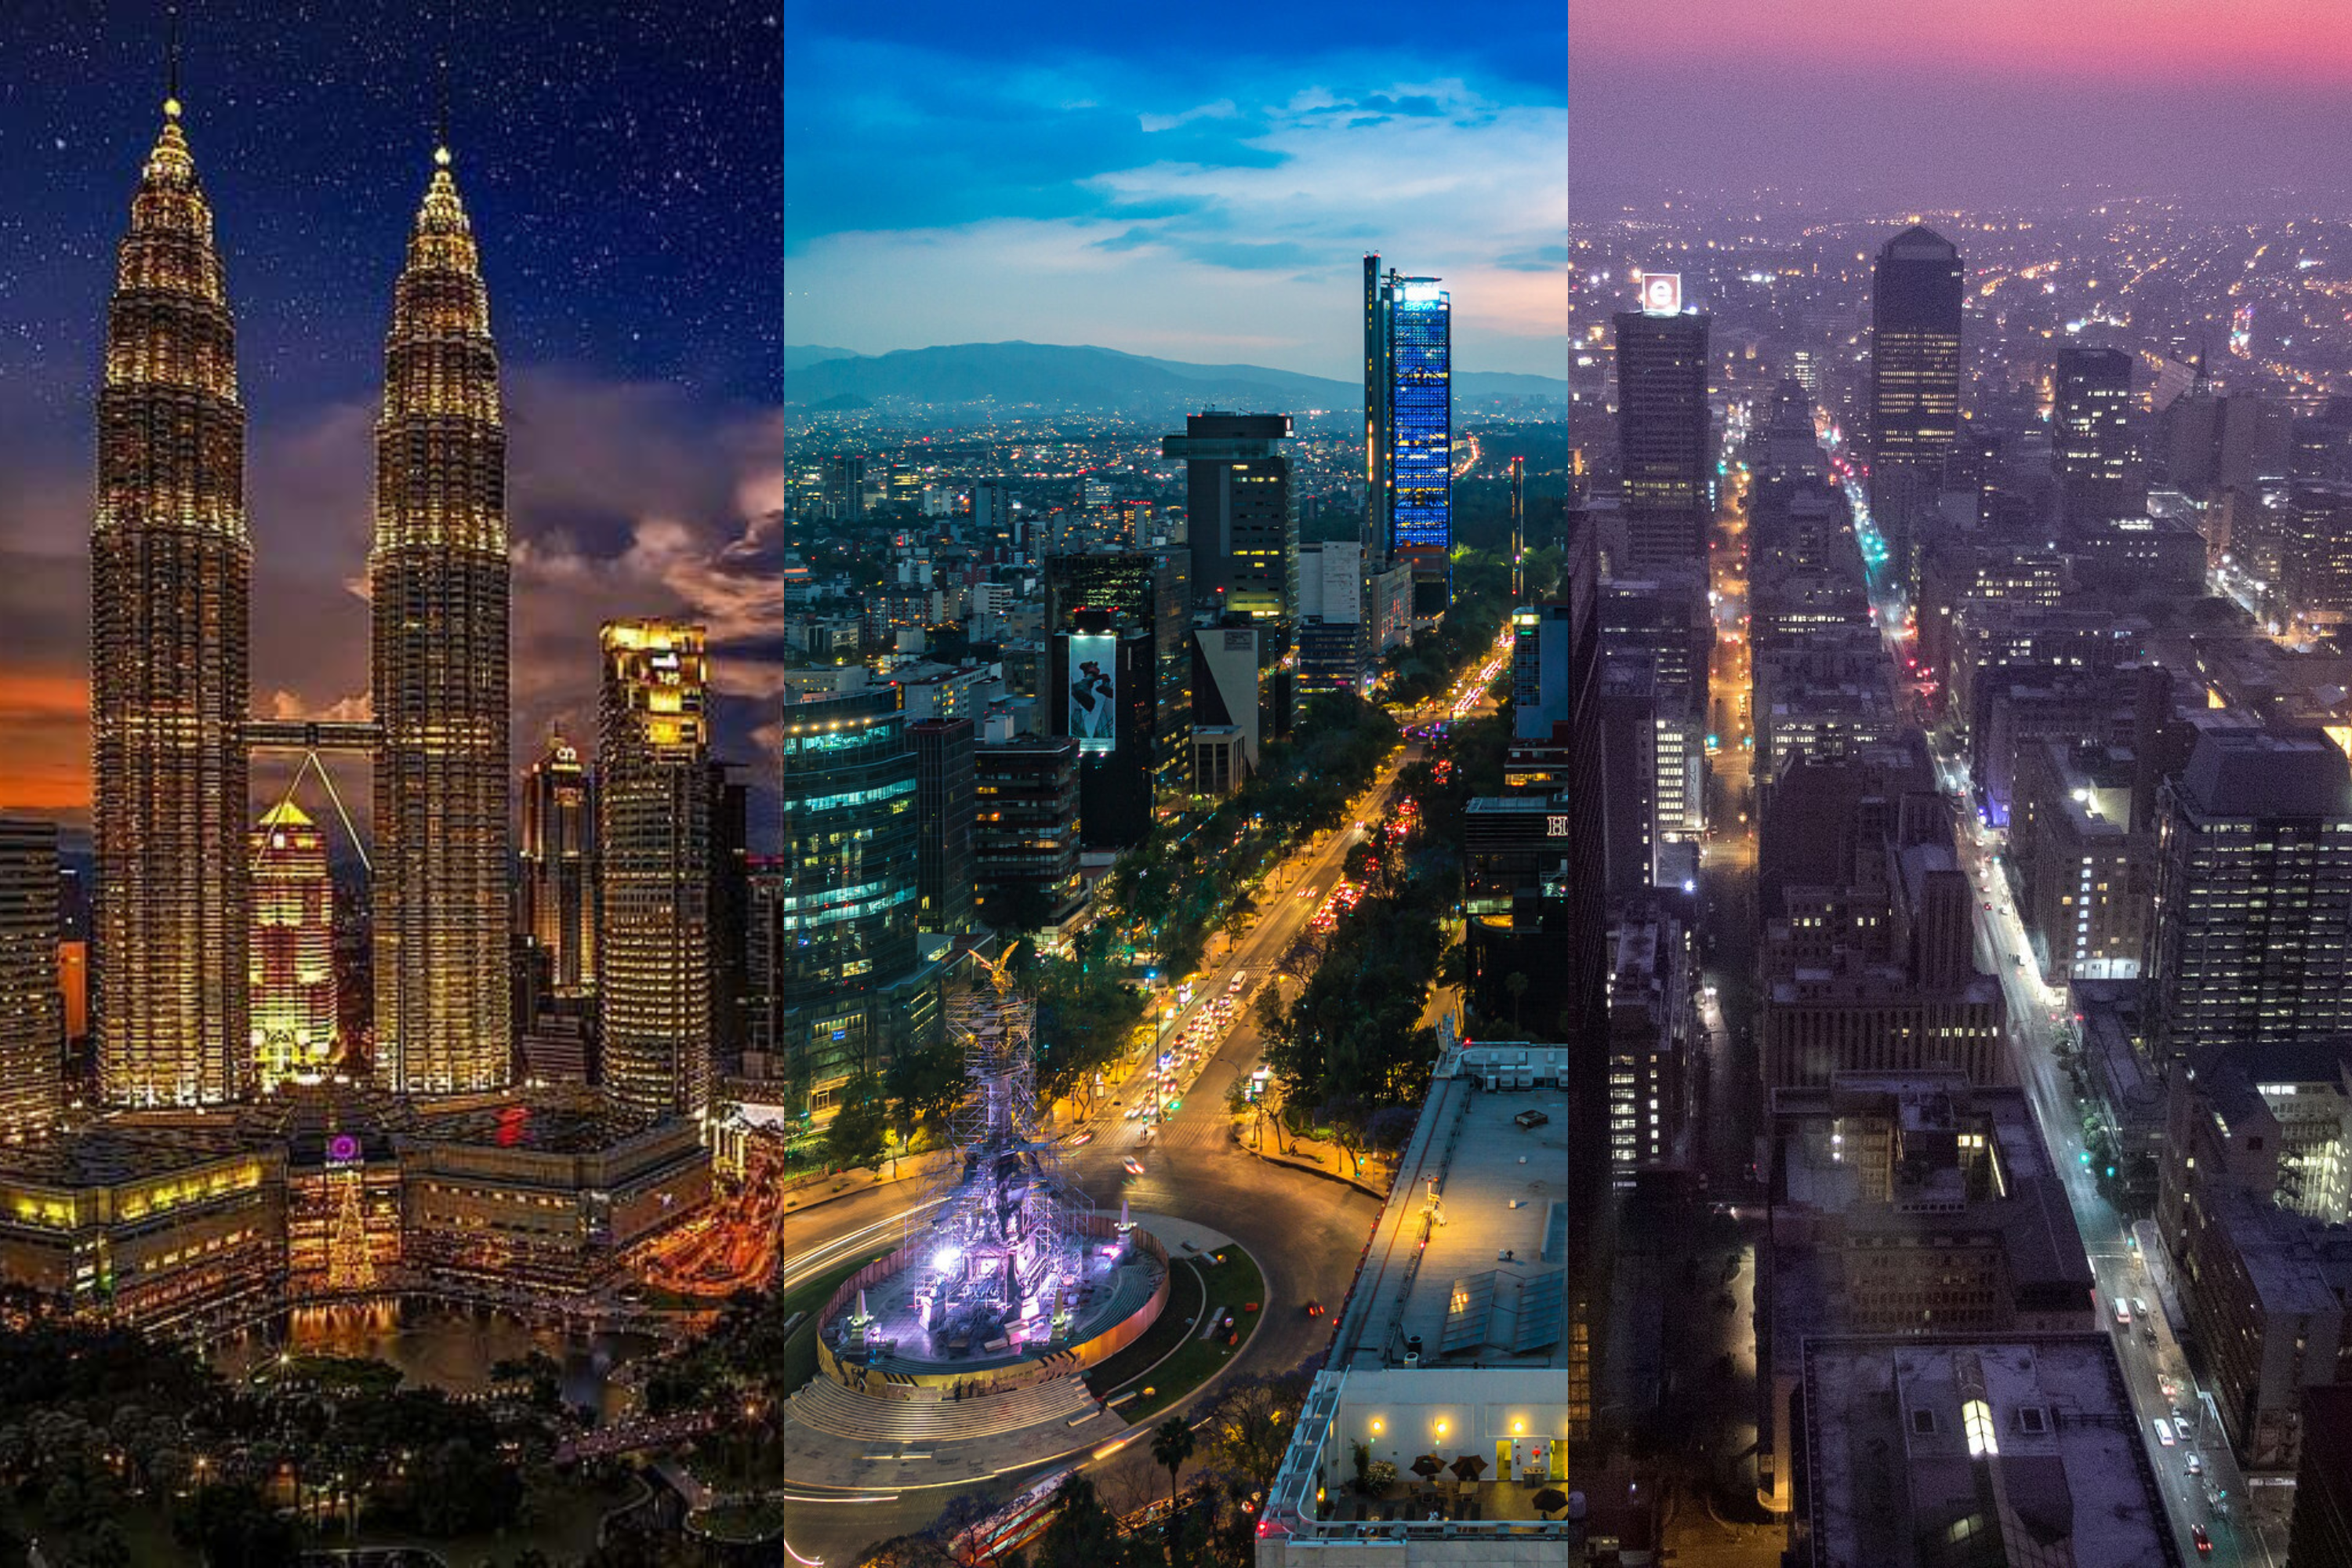 A grid of photos from cities in Malaysia, Mexico, and South Africa.